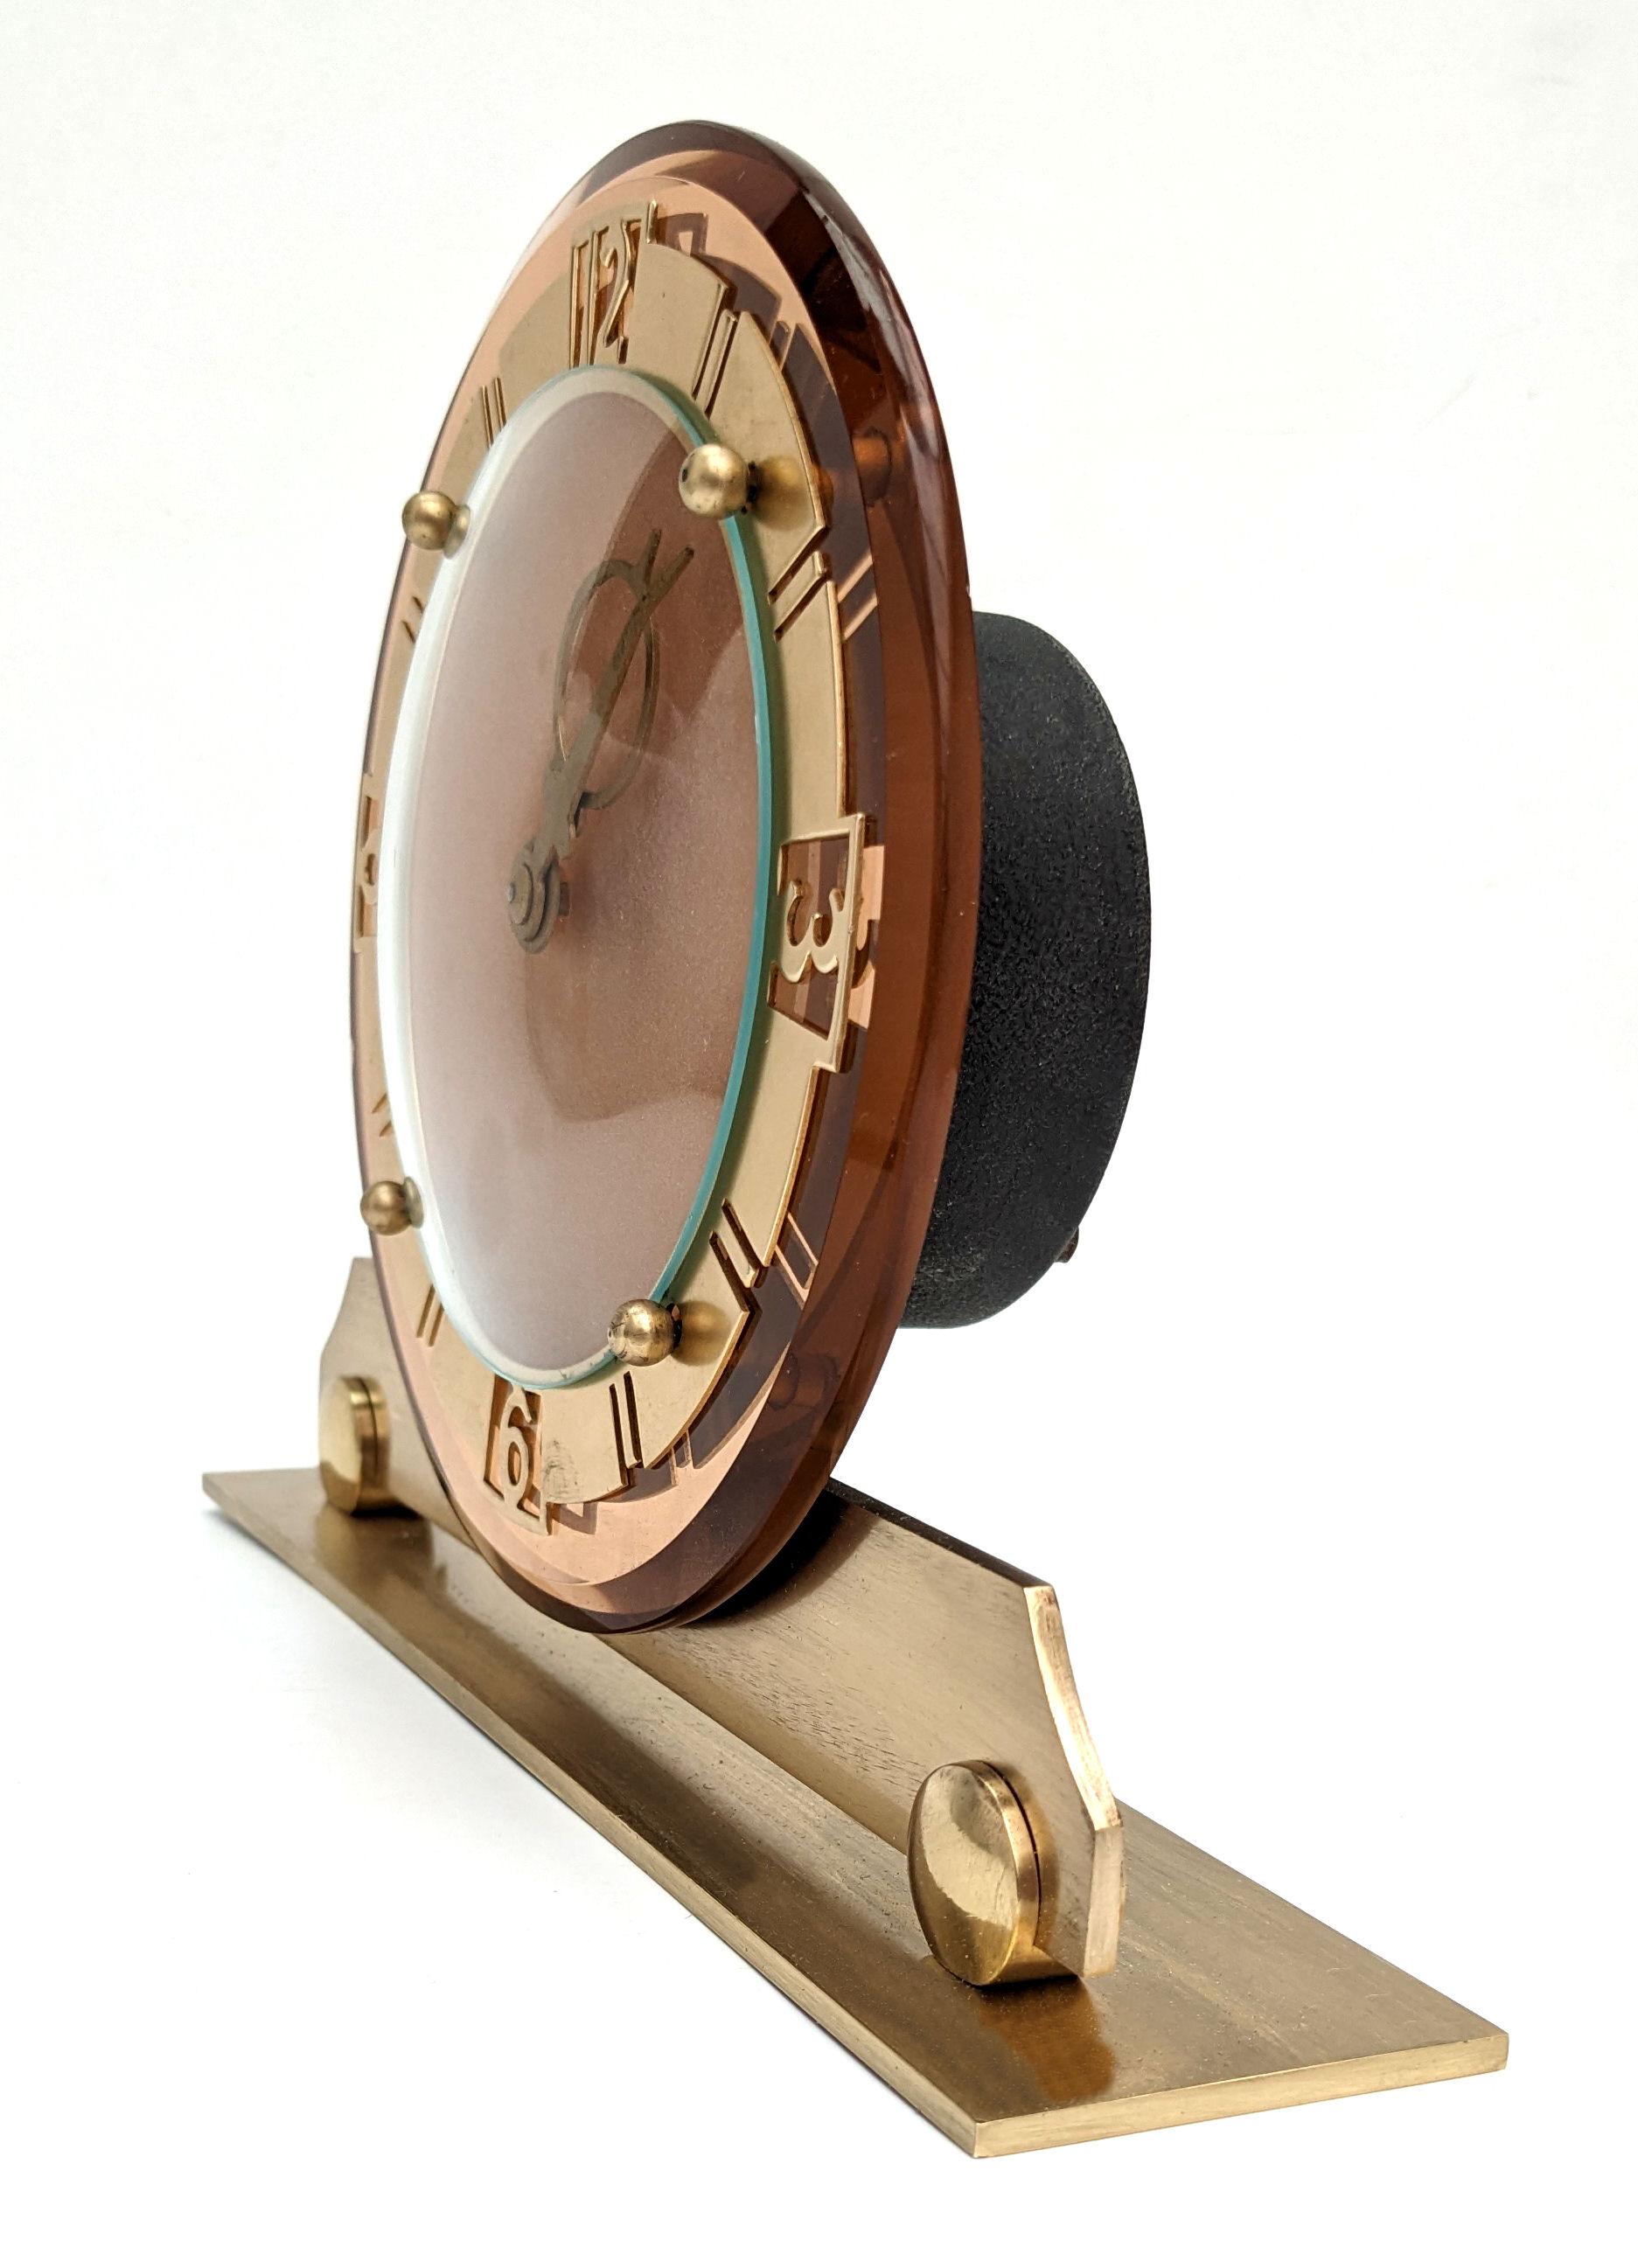 Art Deco Glamourous  Mechanical 8 Day Mirror Clock,  English, c1930s For Sale 1